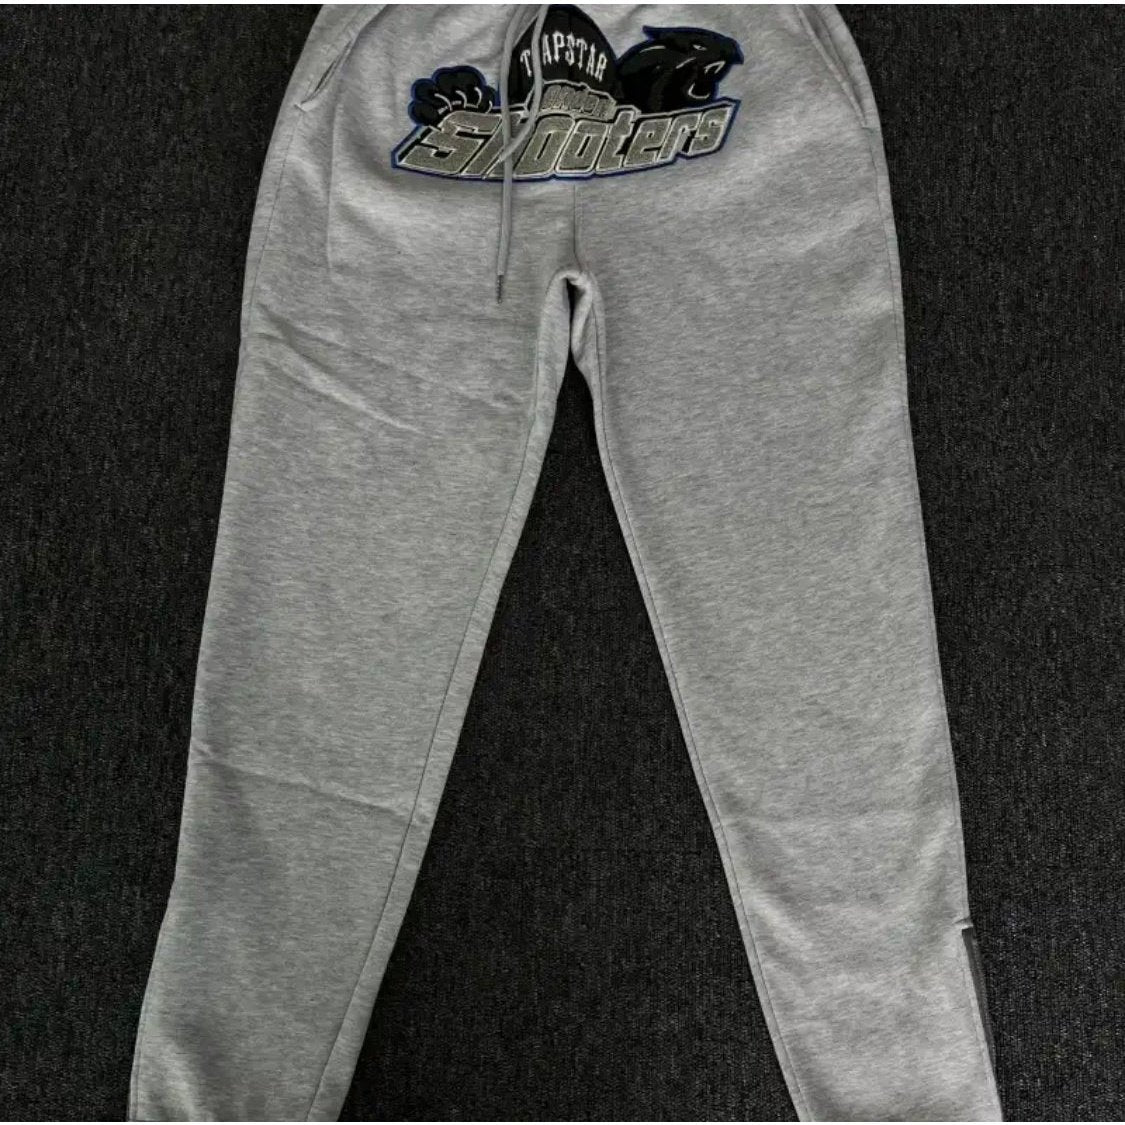 Shooters tracksuit - Grey/Black/Blue